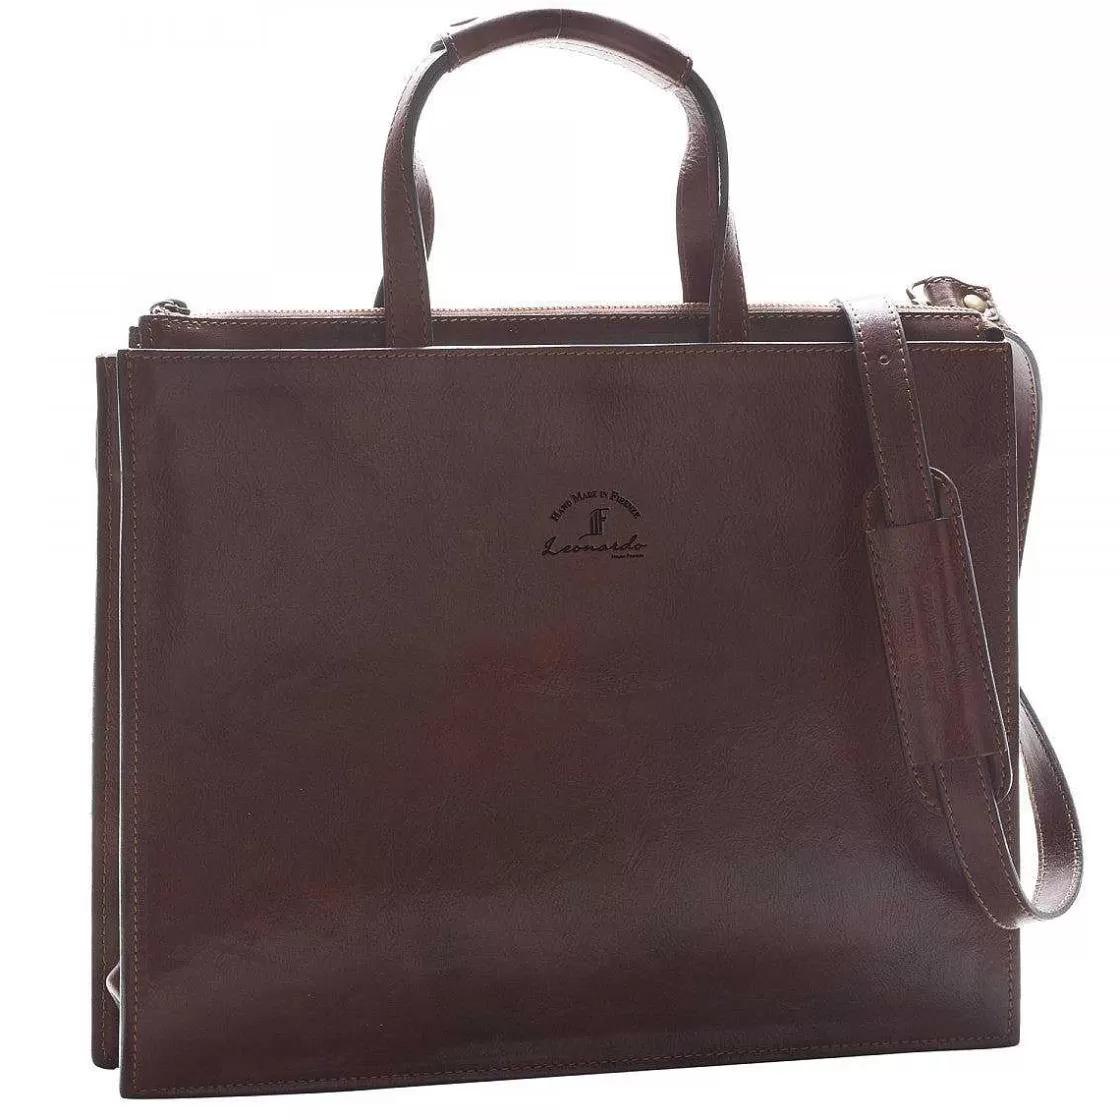 Leonardo Satchel Shopping Bag In Full-Grain Leather With Zip, Three Compartments And Adjustable Shoulder Strap New